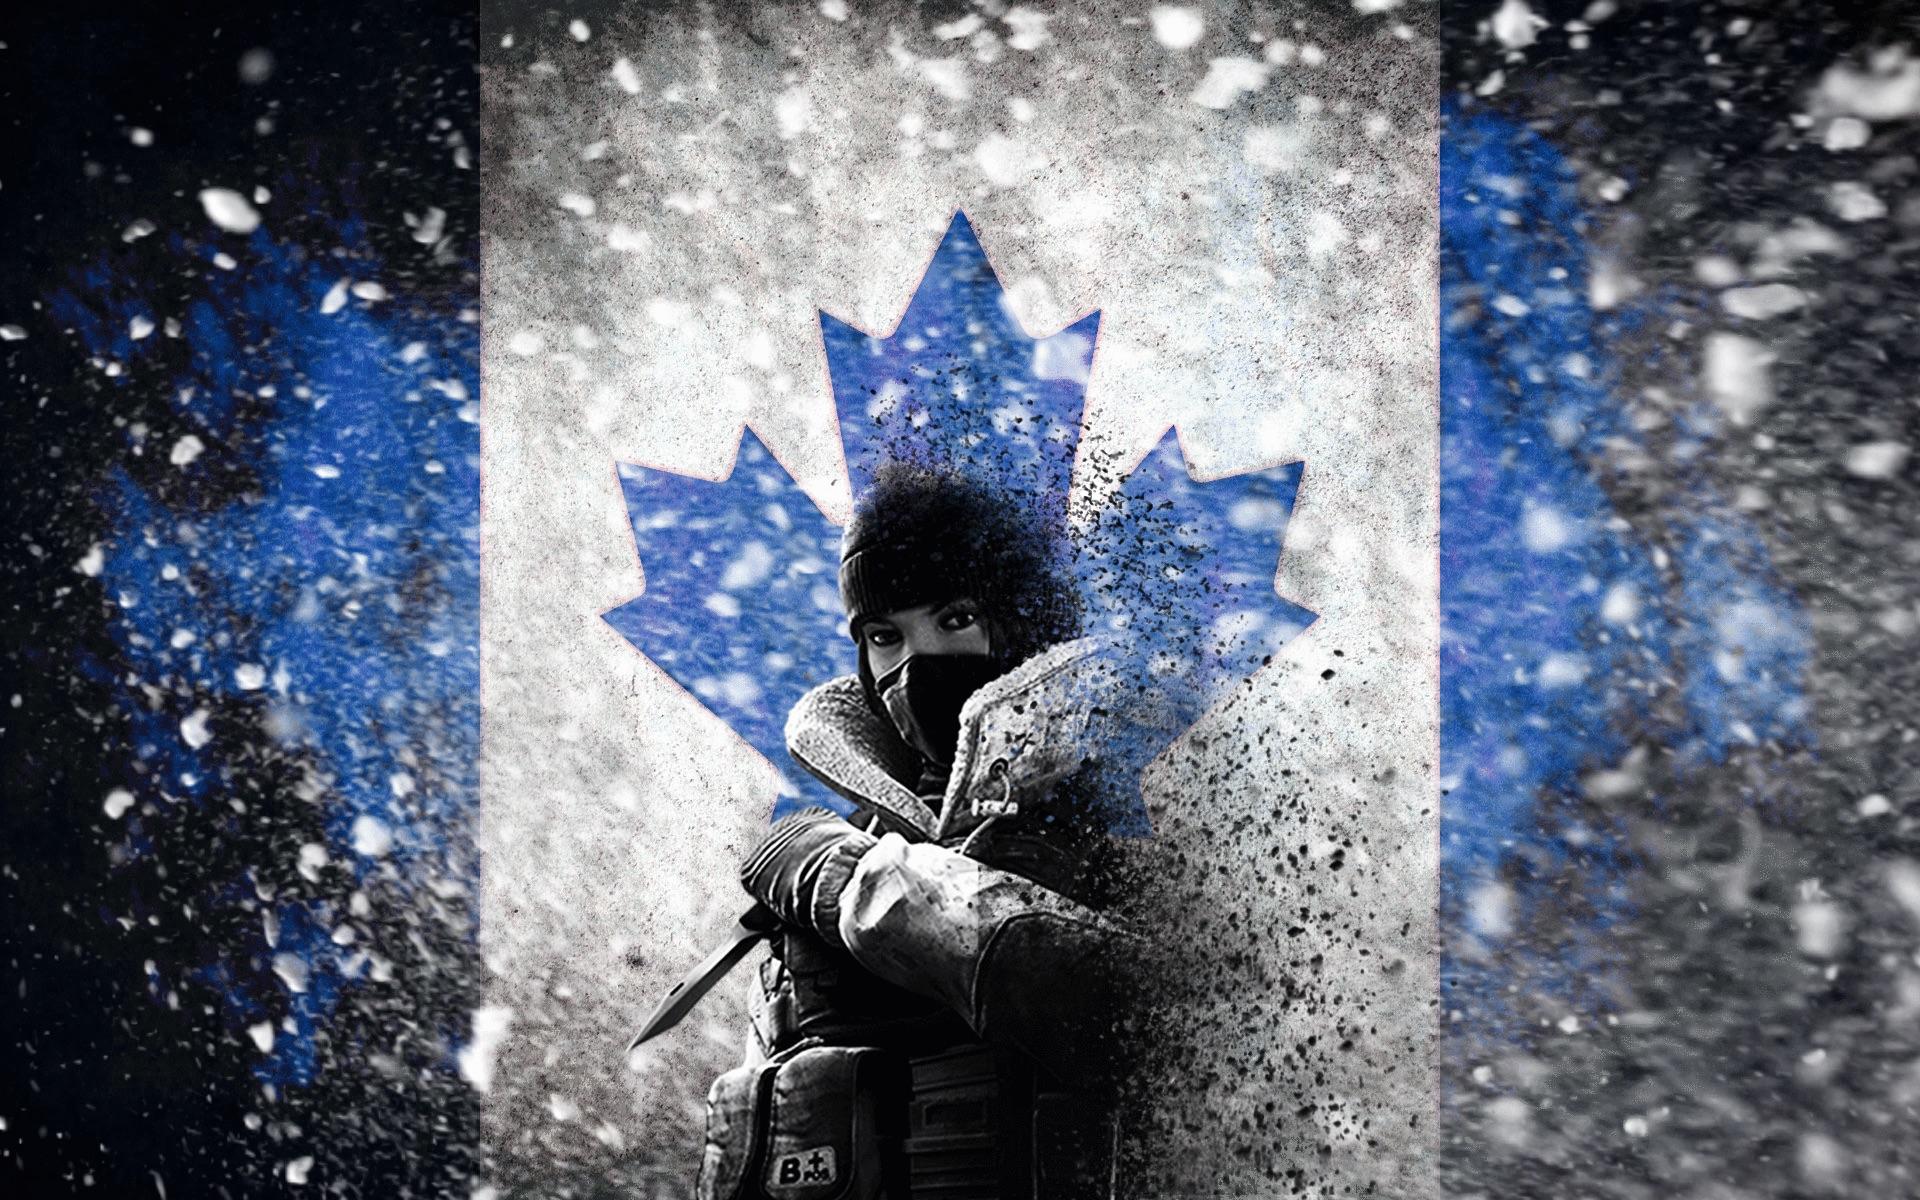 Frost wallpaper (any advice would be appreciated I am new to photohop :p)